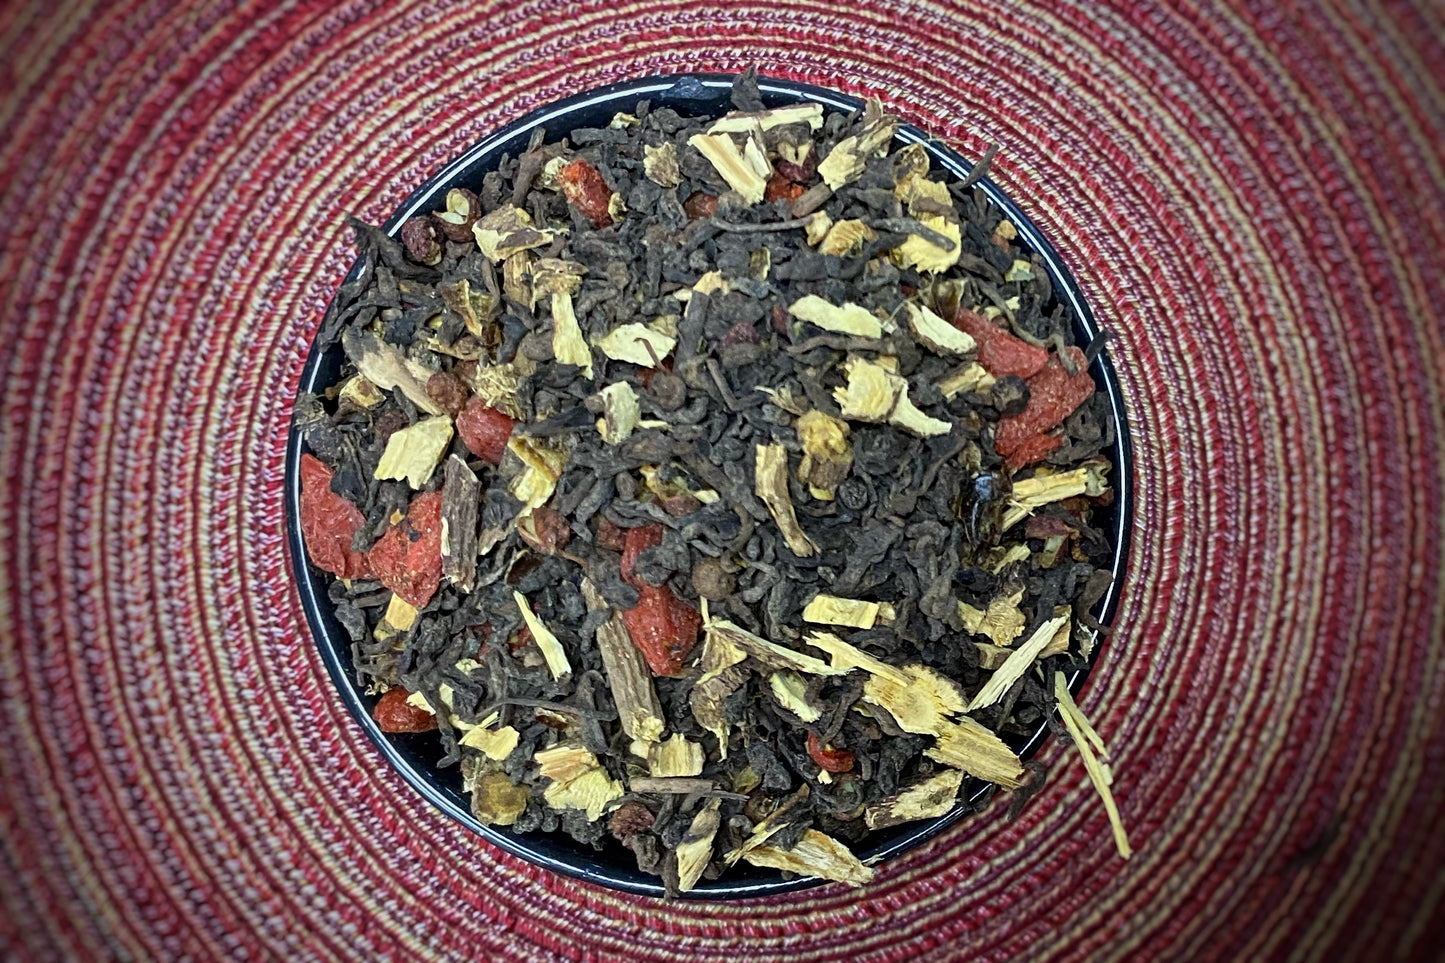 a cup of loose tea leaves